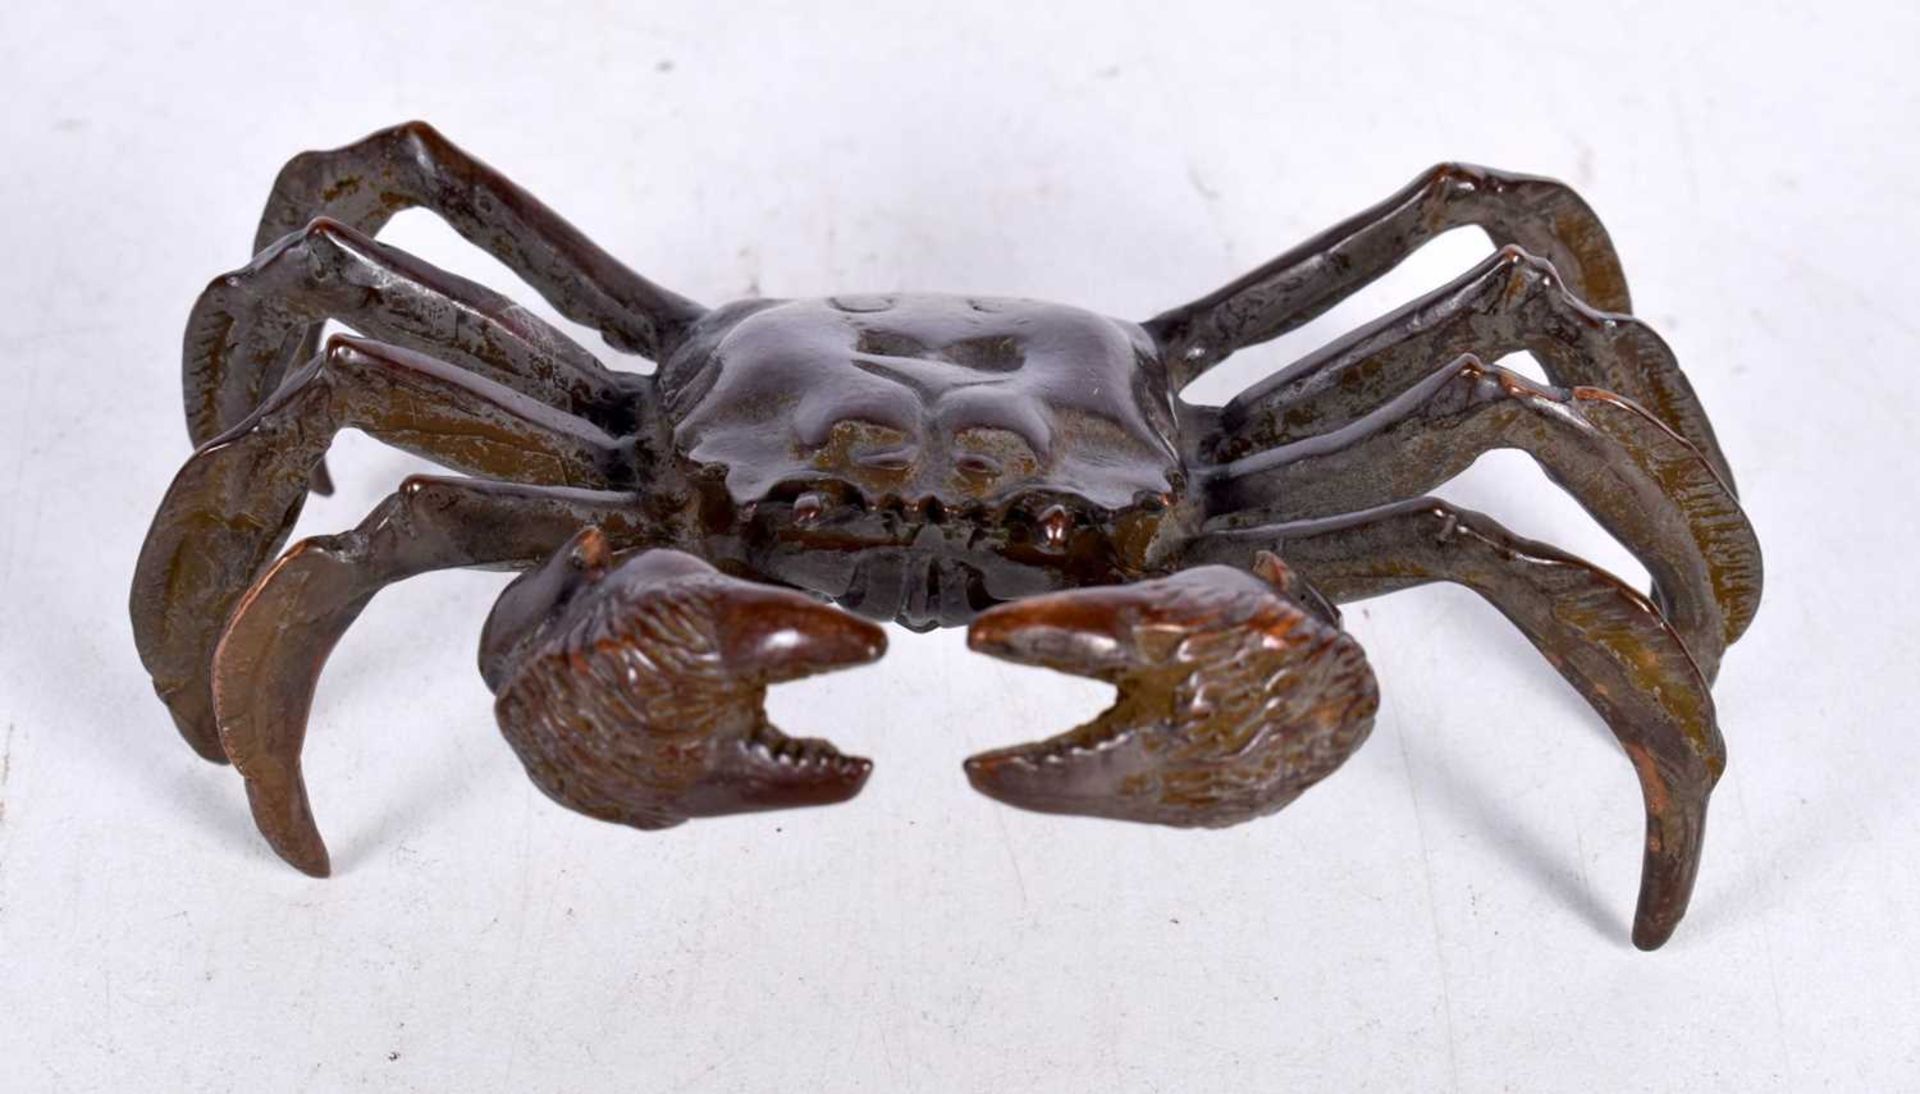 A Large Japanese Bronze Model of a Crab. 11.6cm x 7.1cm x 4.8cm, weight 242g